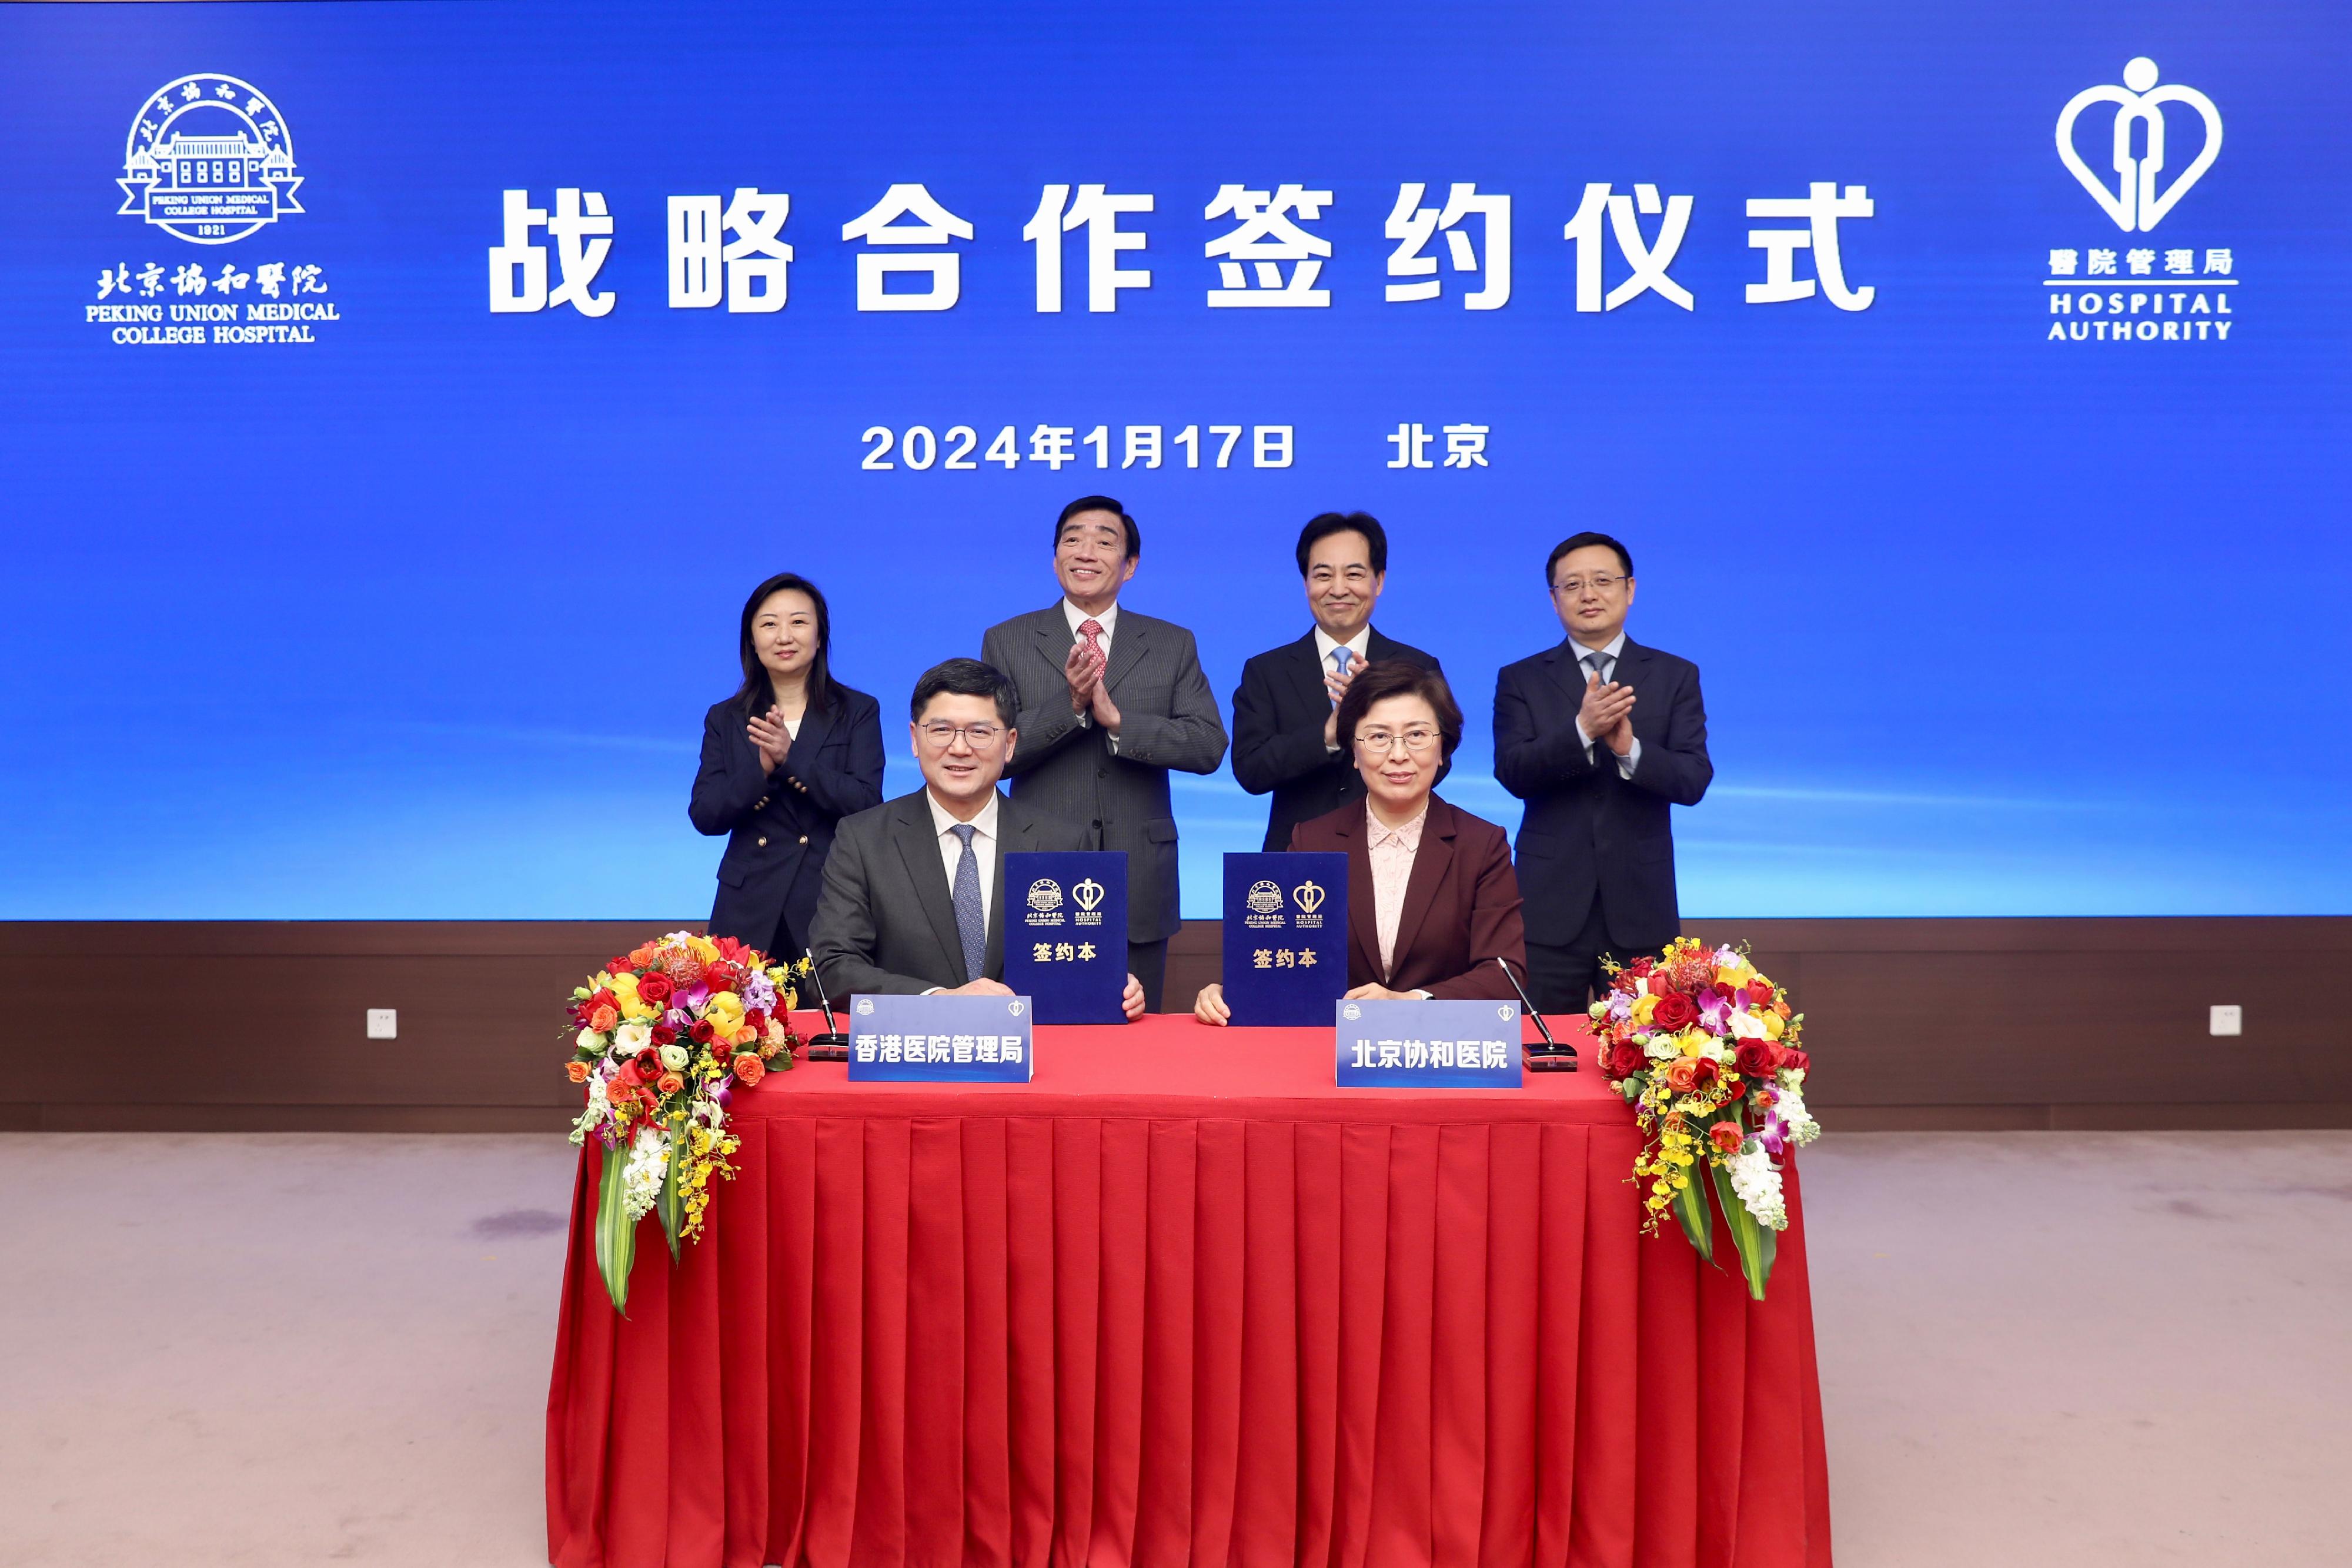 The Hospital Authority (HA) Chief Executive, Dr Tony Ko (front row, left), and the President of the Peking Union Medical College Hospital (PUMCH), Professor Zhang Shuyang (front row, right), yesterday (January 17) signed a collaborative agreement for five years (2024-2029) to strengthen exchanges and co-operation in the development and management of public hospitals between the two parties. Photo also shows the HA Chairman, Mr Henry Fan (back row, second left); the Honorary President of the PUMCH, Professor Zhao Yupei (back row, second right); the Secretary of the Party Committee of the PUMCH, Mr Wu Peixin (back row, first right); and the Deputy Director General of the Hong Kong, Macao and Taiwan Office of the National Health Commission of the People’s Republic of China, Ms Li Wei (back row, first left), after the signing ceremony.